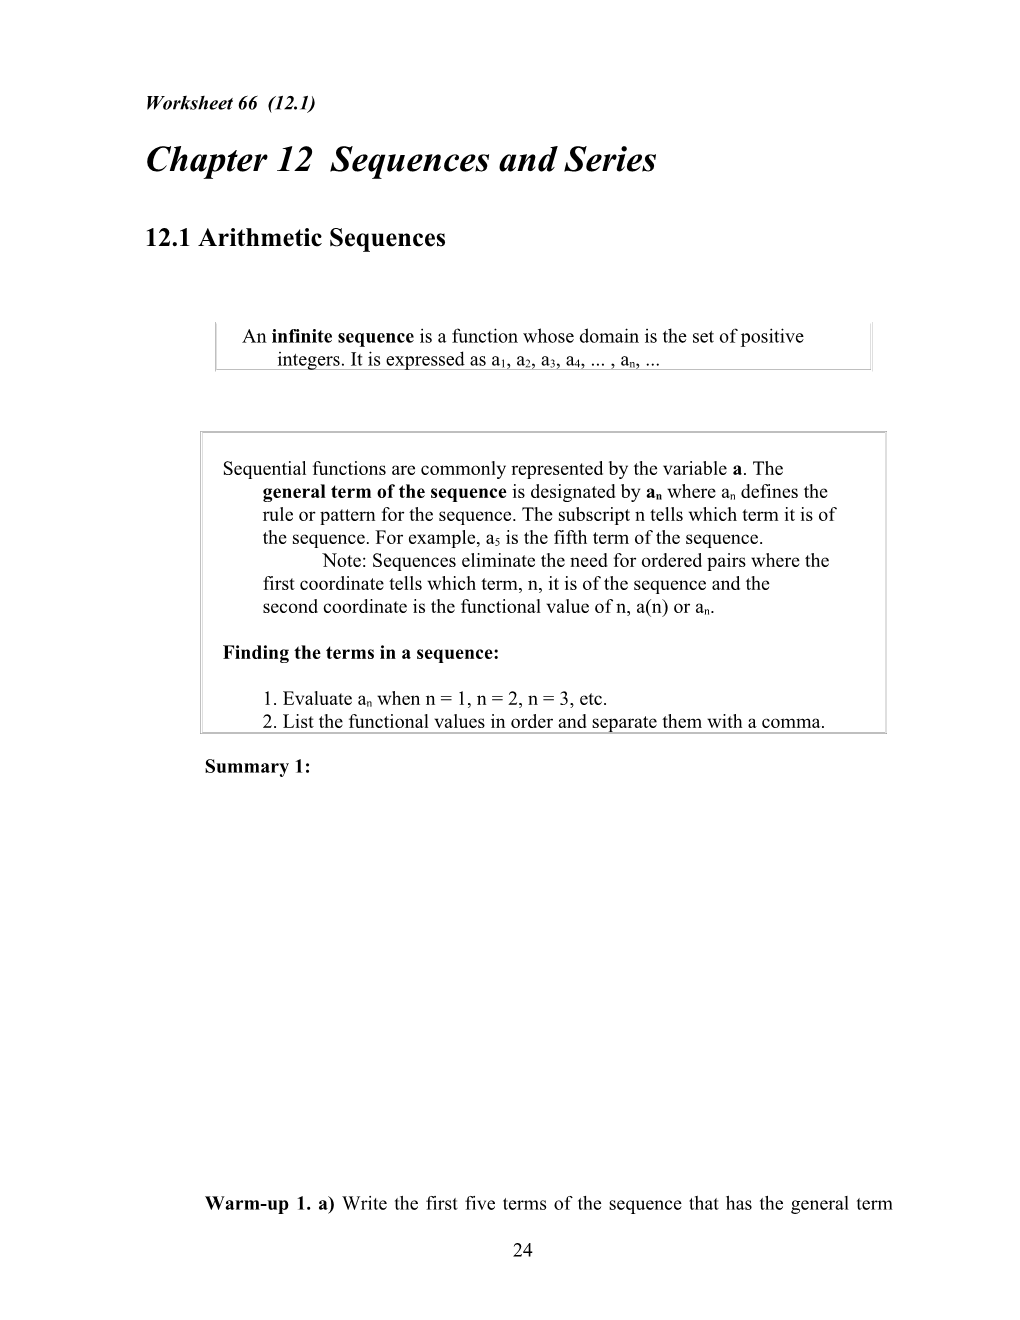 Chapter 12 Sequences and Series